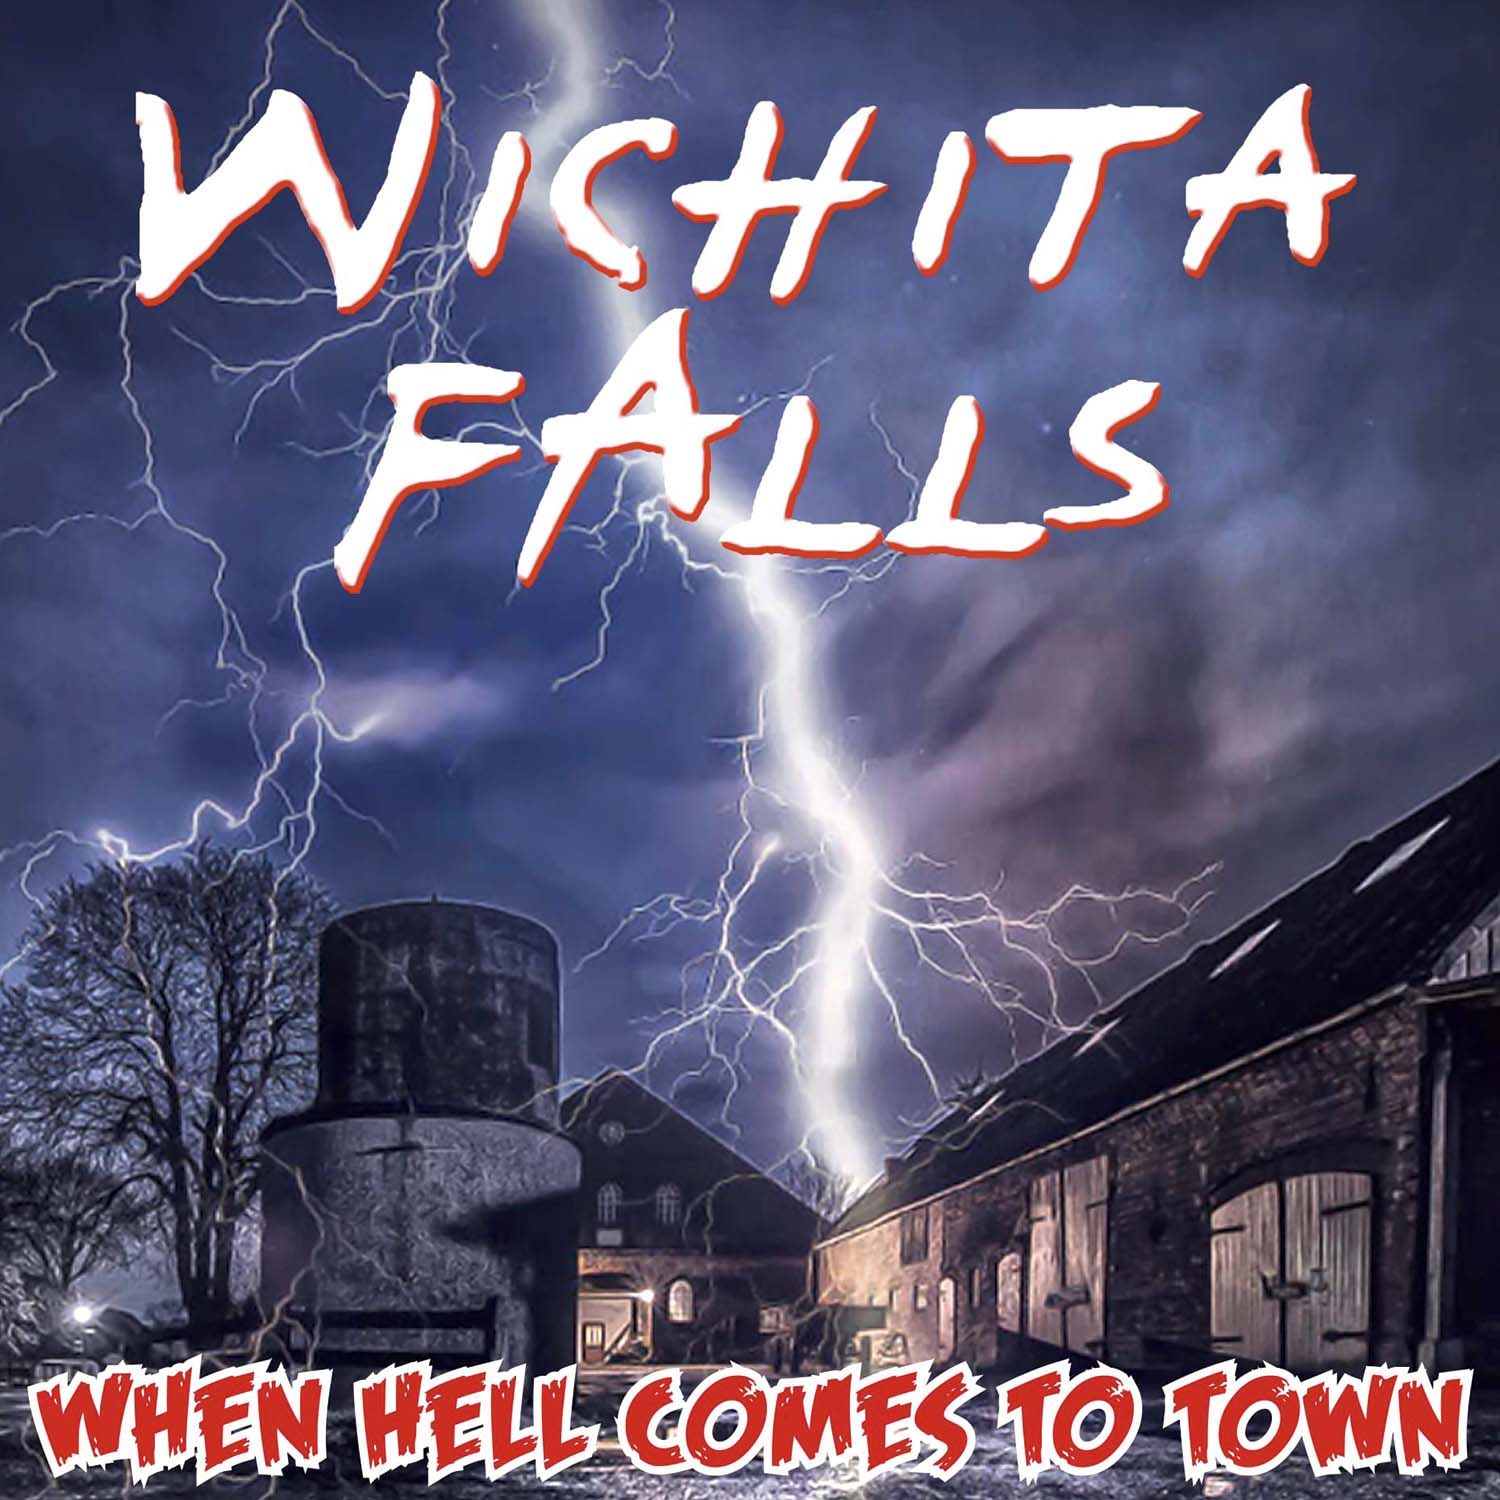 Wichita Falls - When Hell Comes To Town